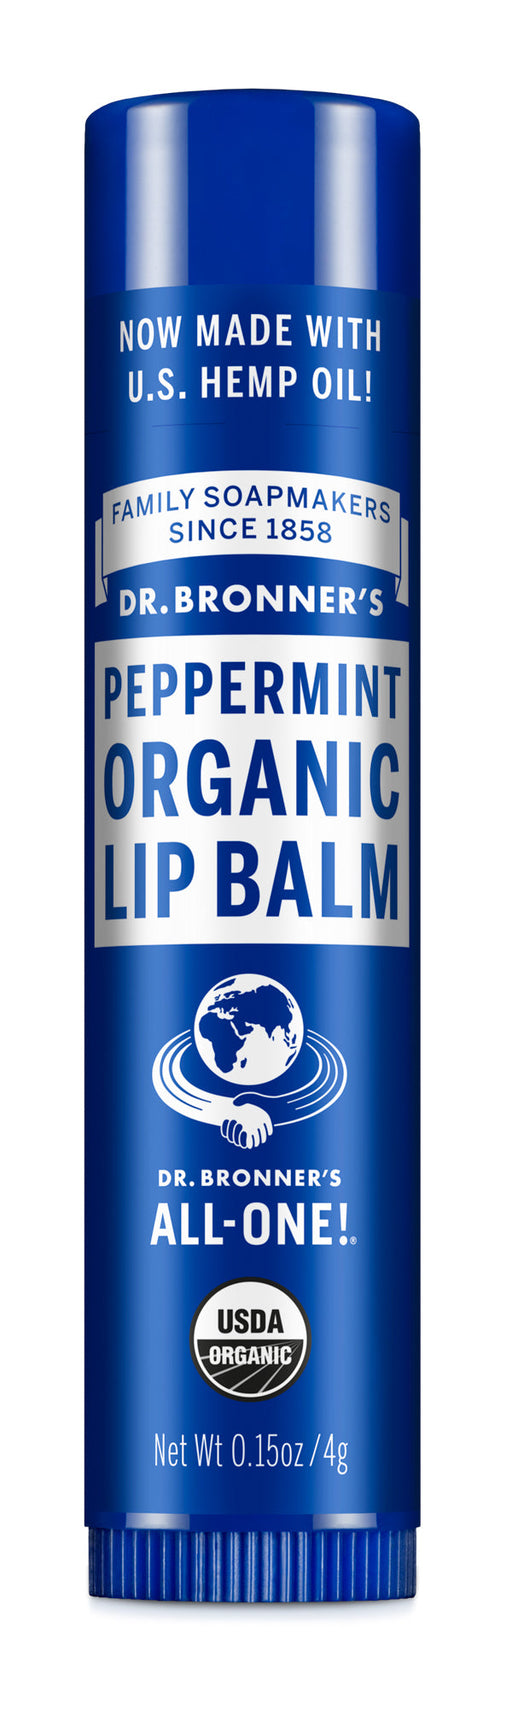 Peppermint - Organic Lip Balms - .15 oz - ProCare Outlet by Dr Bronner's